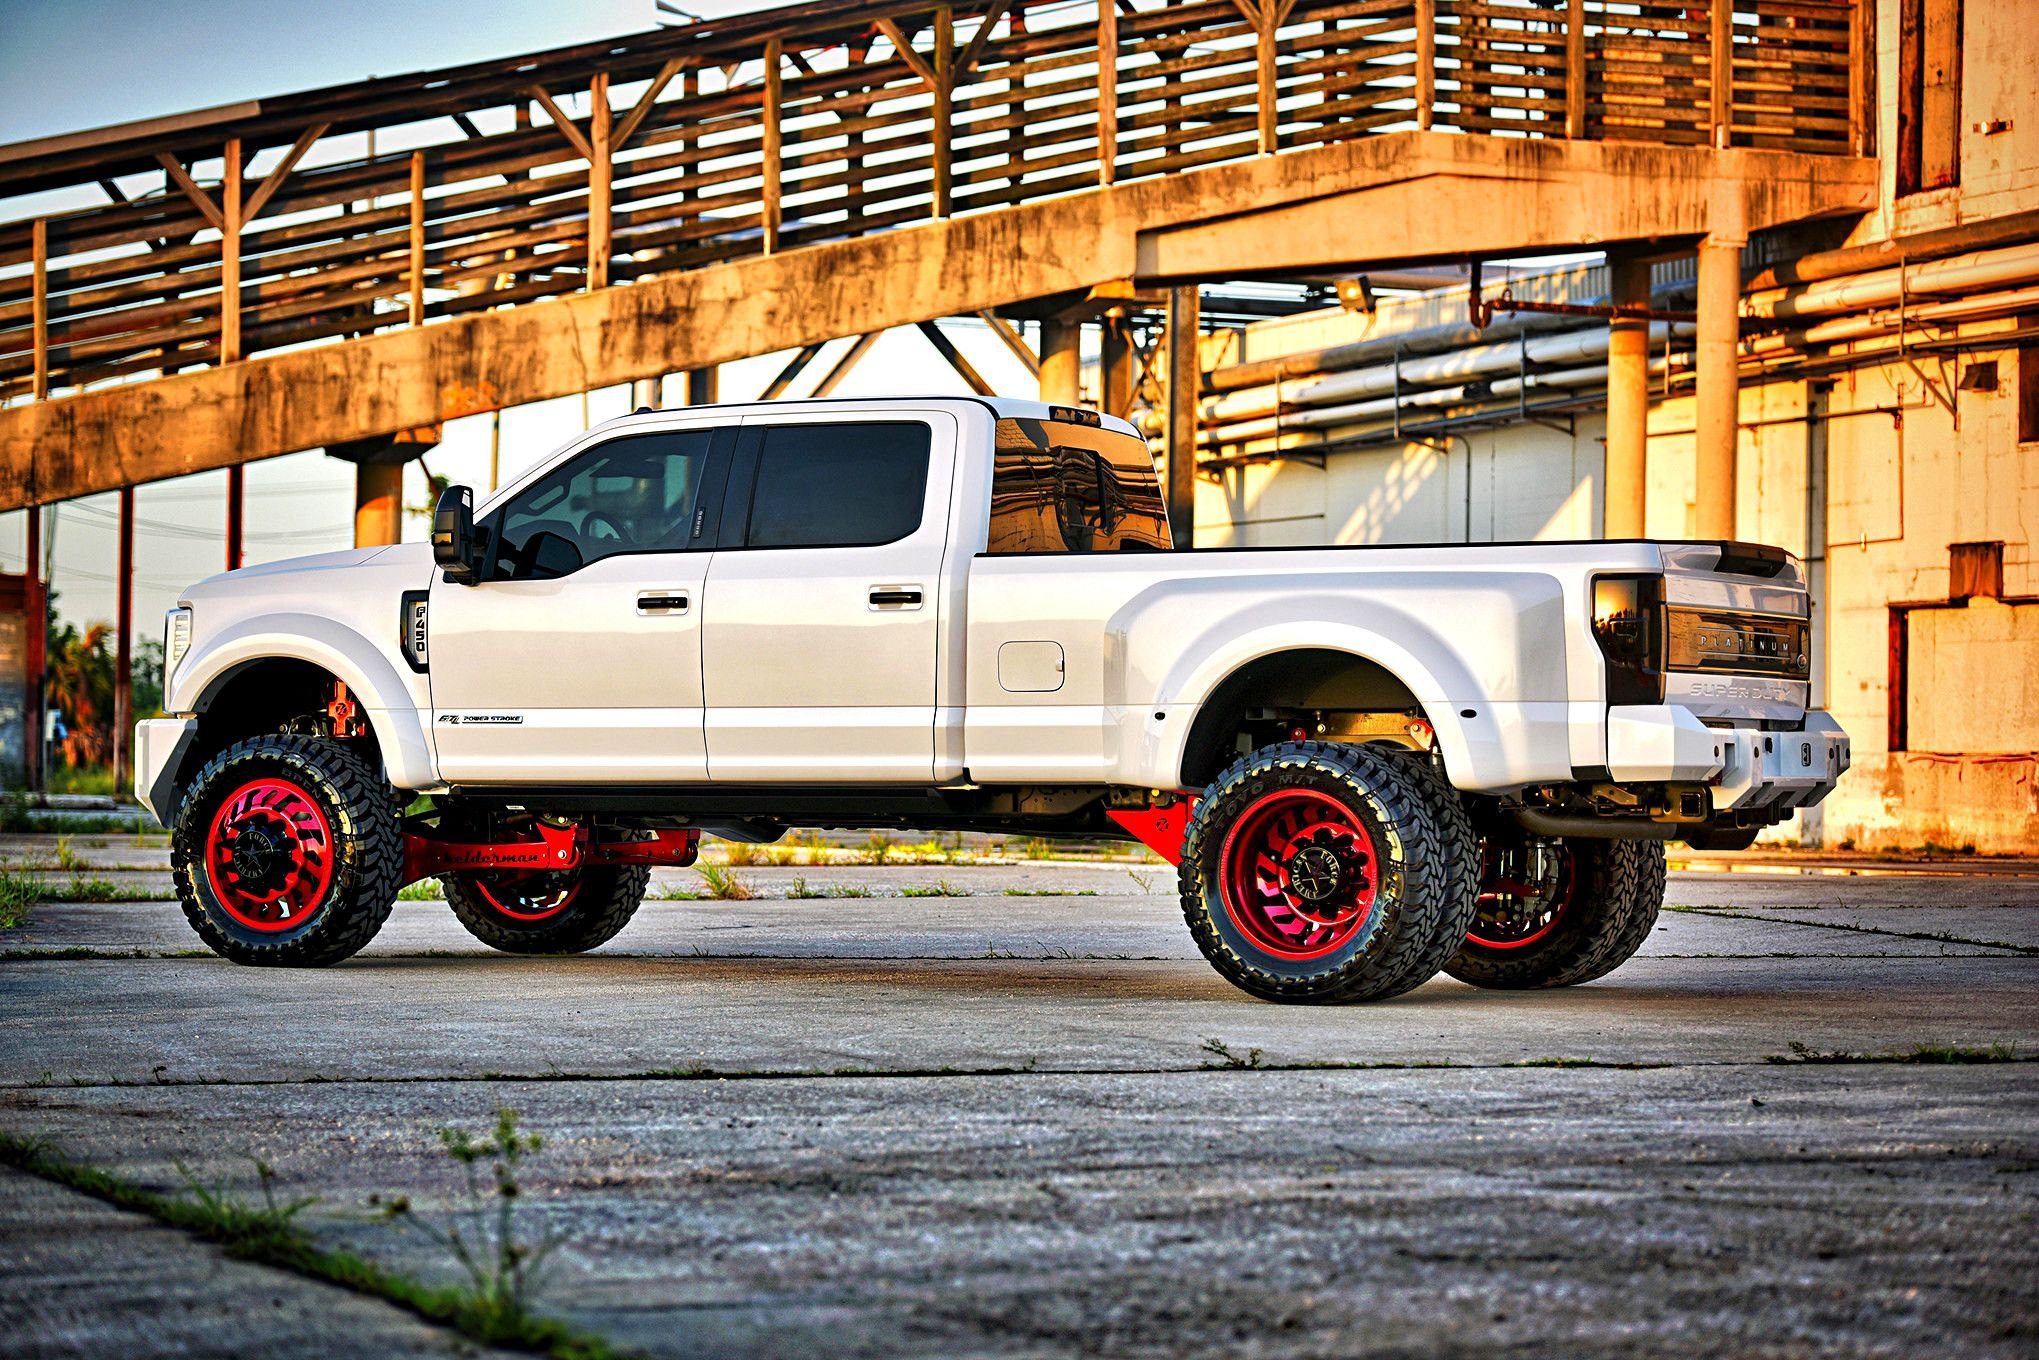 Aftermarket Running Boards on White Lifted Ford F-450 - Photo by Eddie Maloney